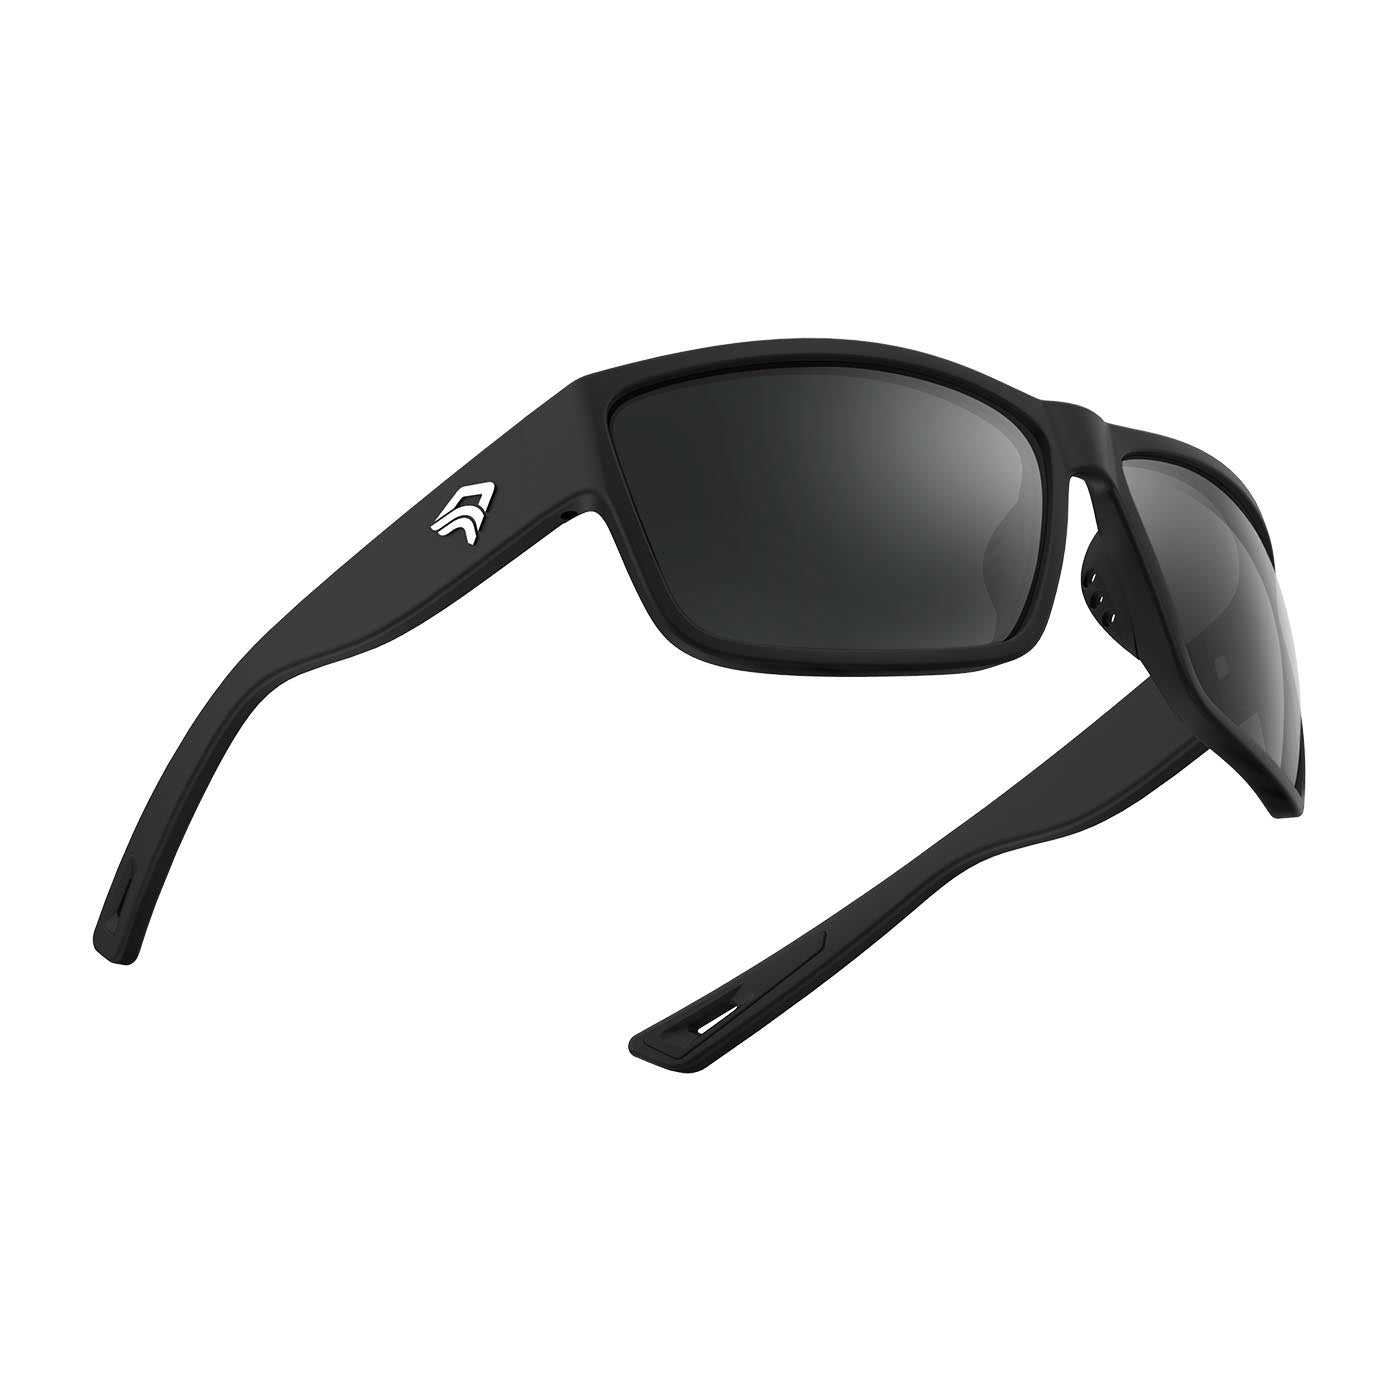 Torege Wild Polarized Sports Sunglasses with Lifetime Warranty - Adjustable and Flexible Frame for Men and Women - Ideal for Cycling, Running, Golf